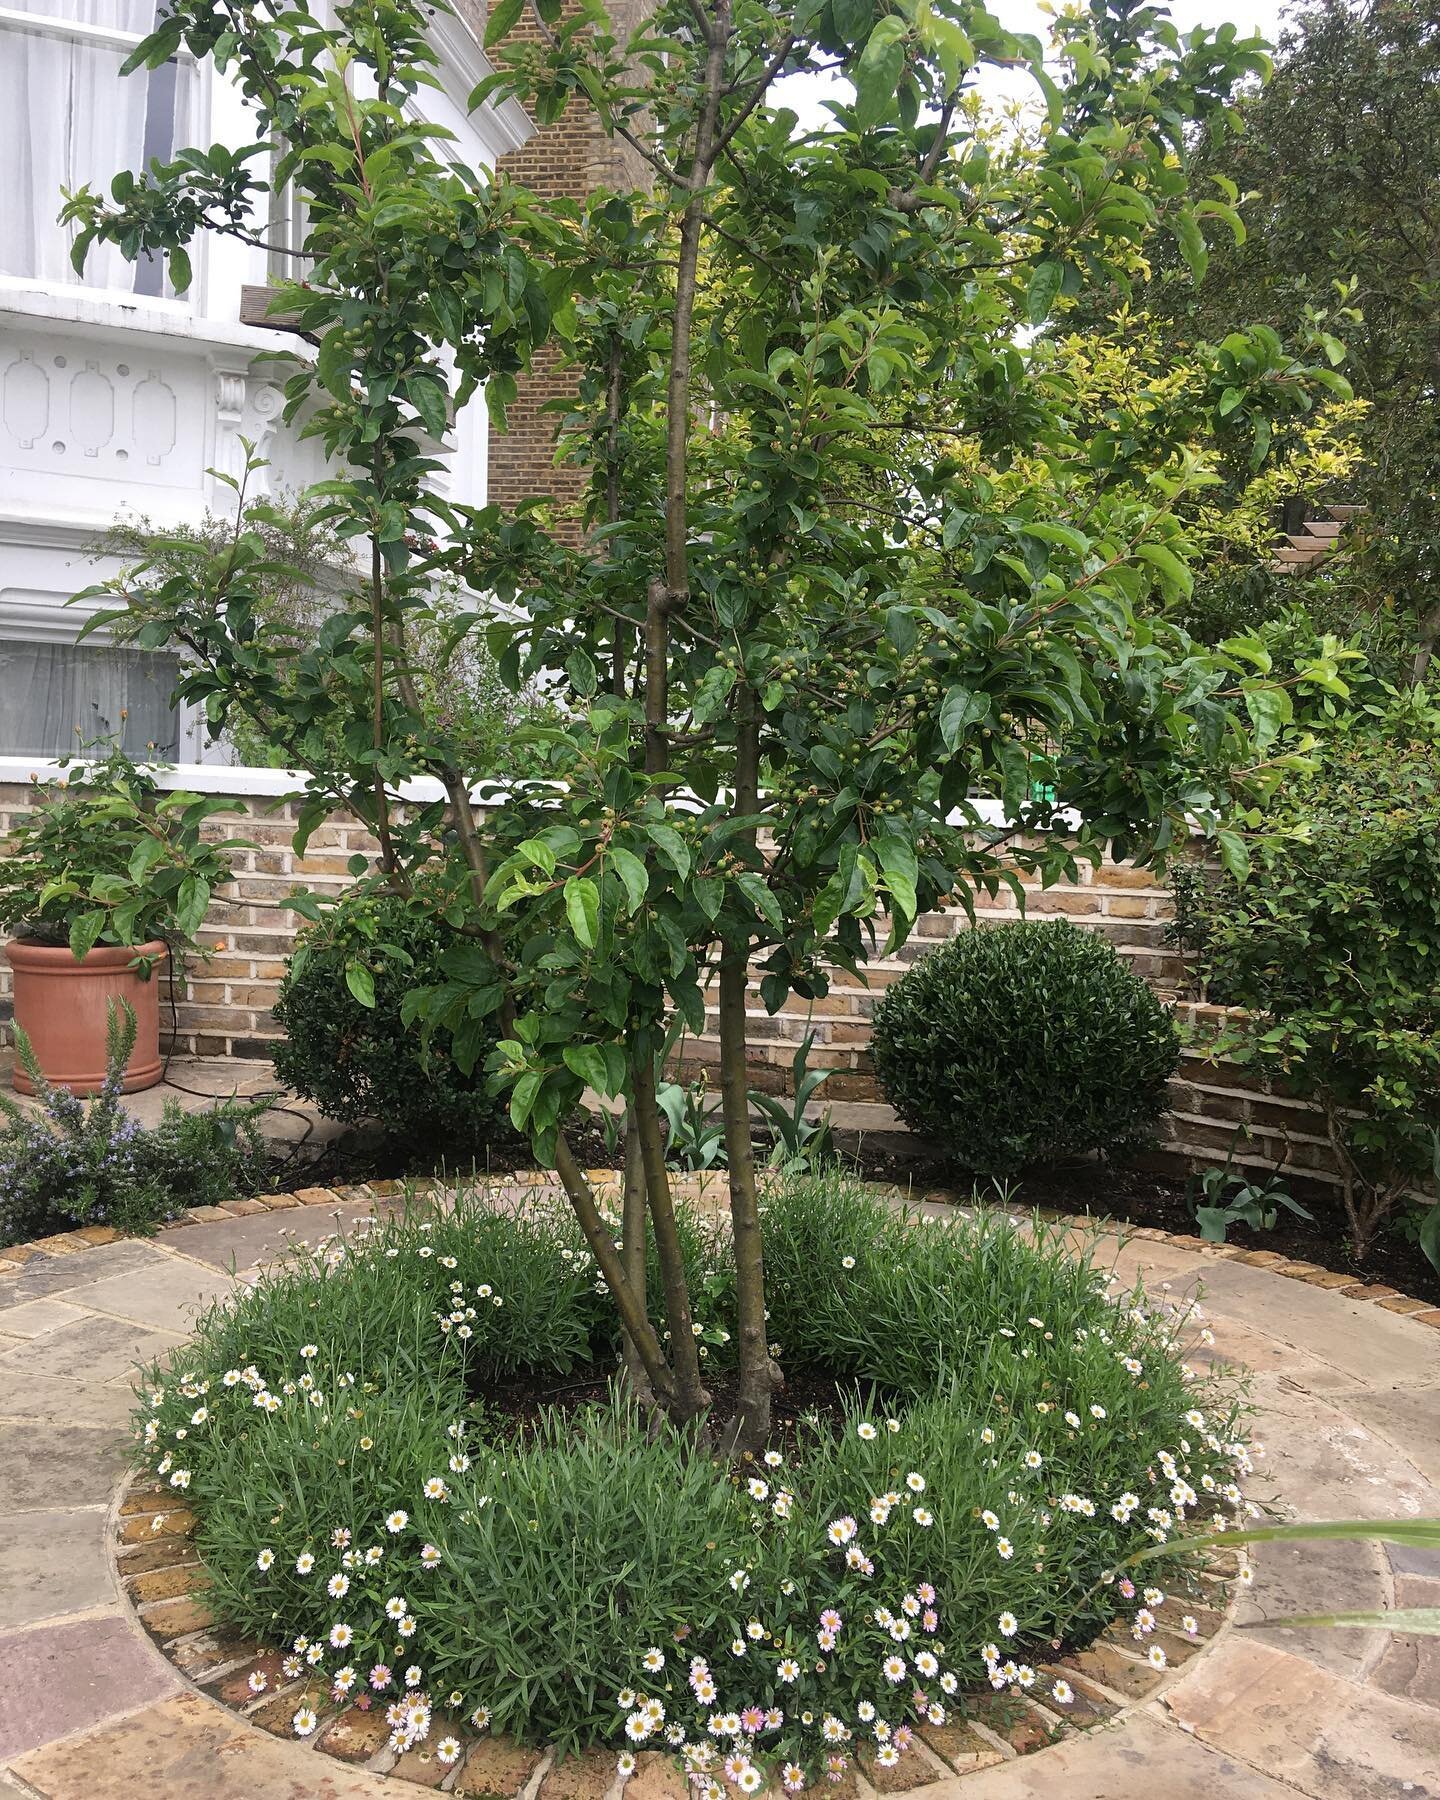 We love to use reclaimed materials in many of our front garden designs, particularly with listed buildings and in conservation areas where they compliment the surrounding architecture, as in this Tufnell Park garden.

This feature crab apple tree pro